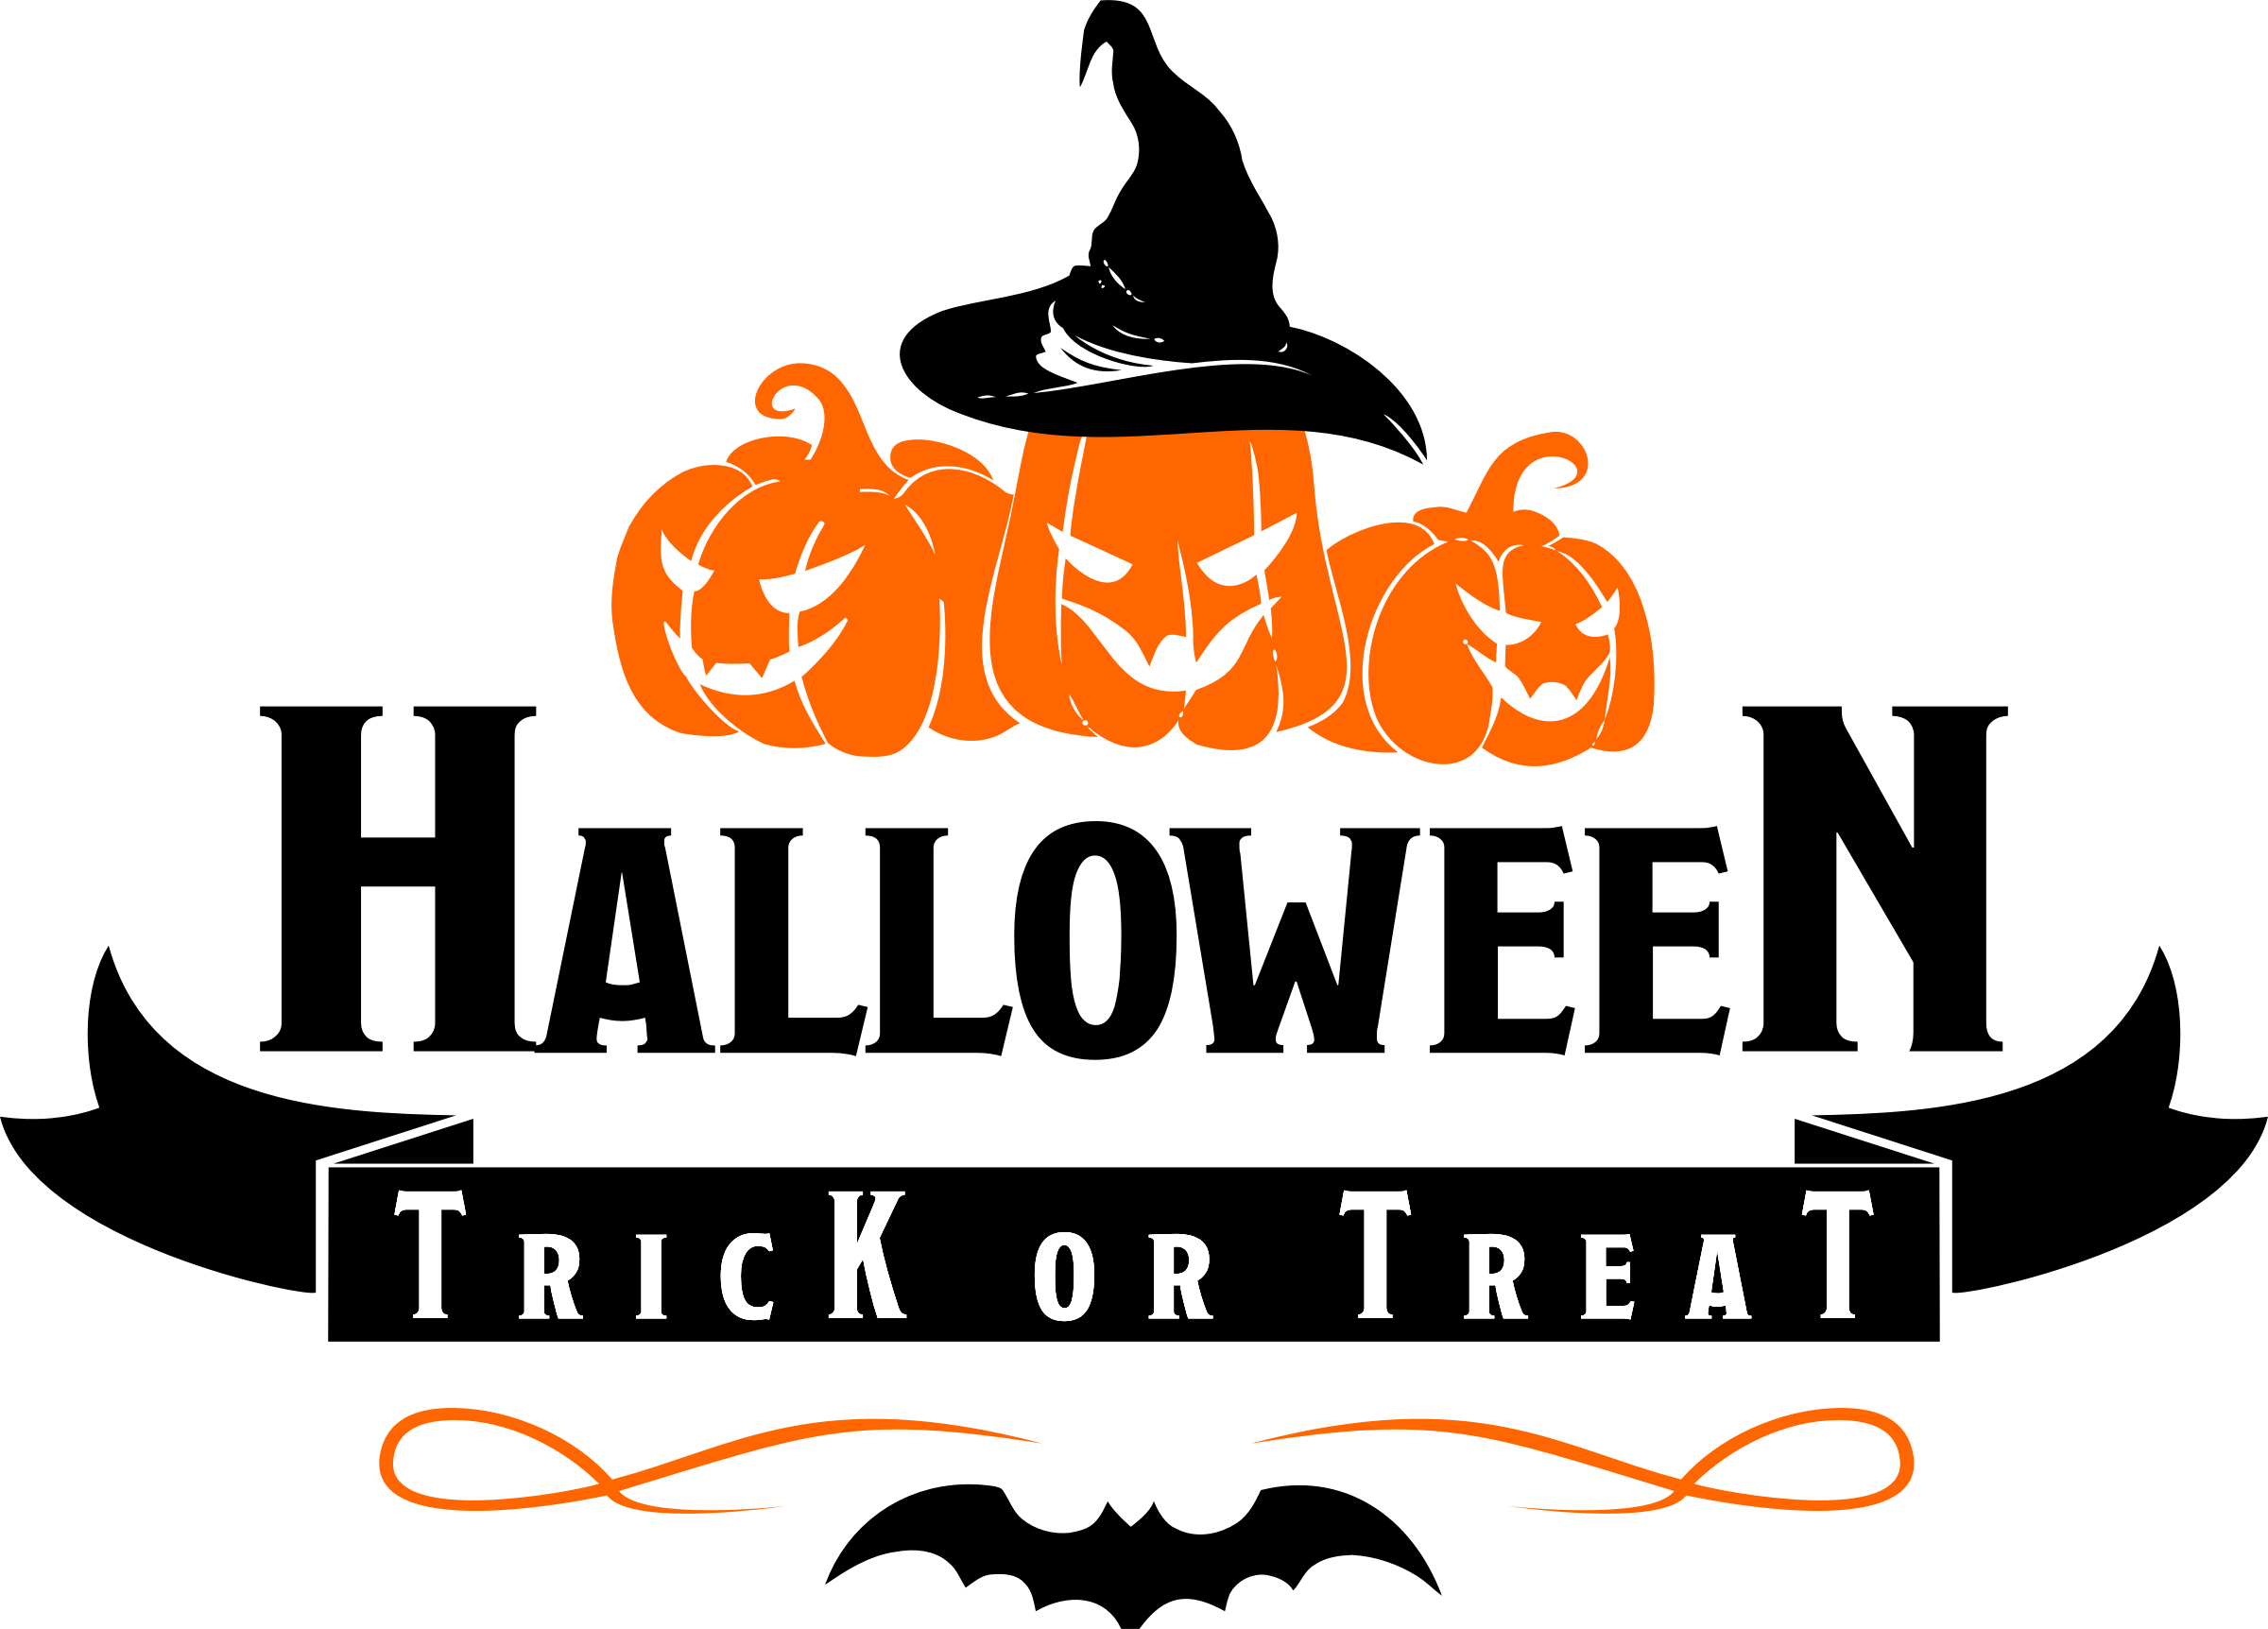 https://www.pngkey.com/png/full/217-2175465_trick-or-treat-png-image-trick-or-treat.png